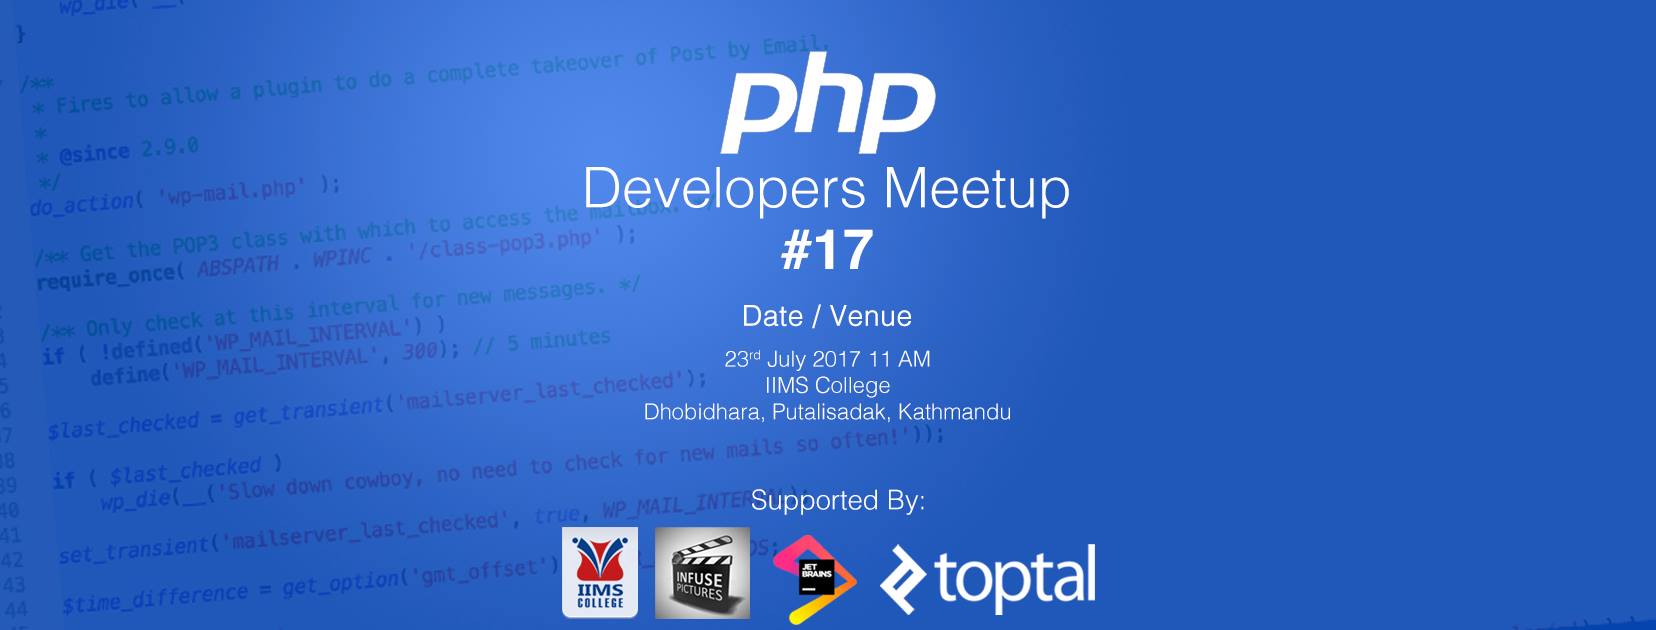 PHP Developer Meetup 17 Cover Photo 1